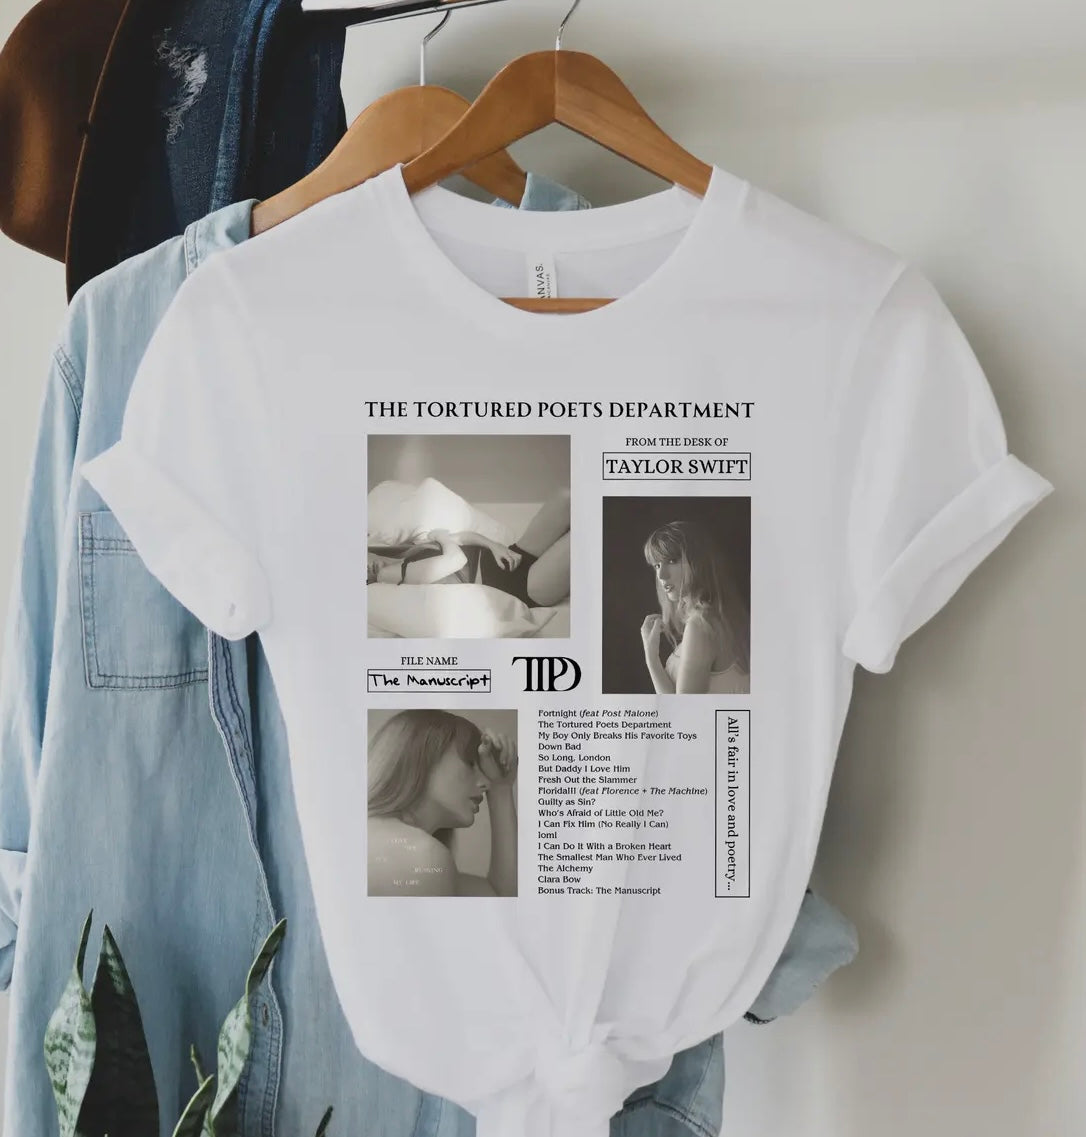 Taylor Swift “The Tortured Poets Department” Graphic Tee